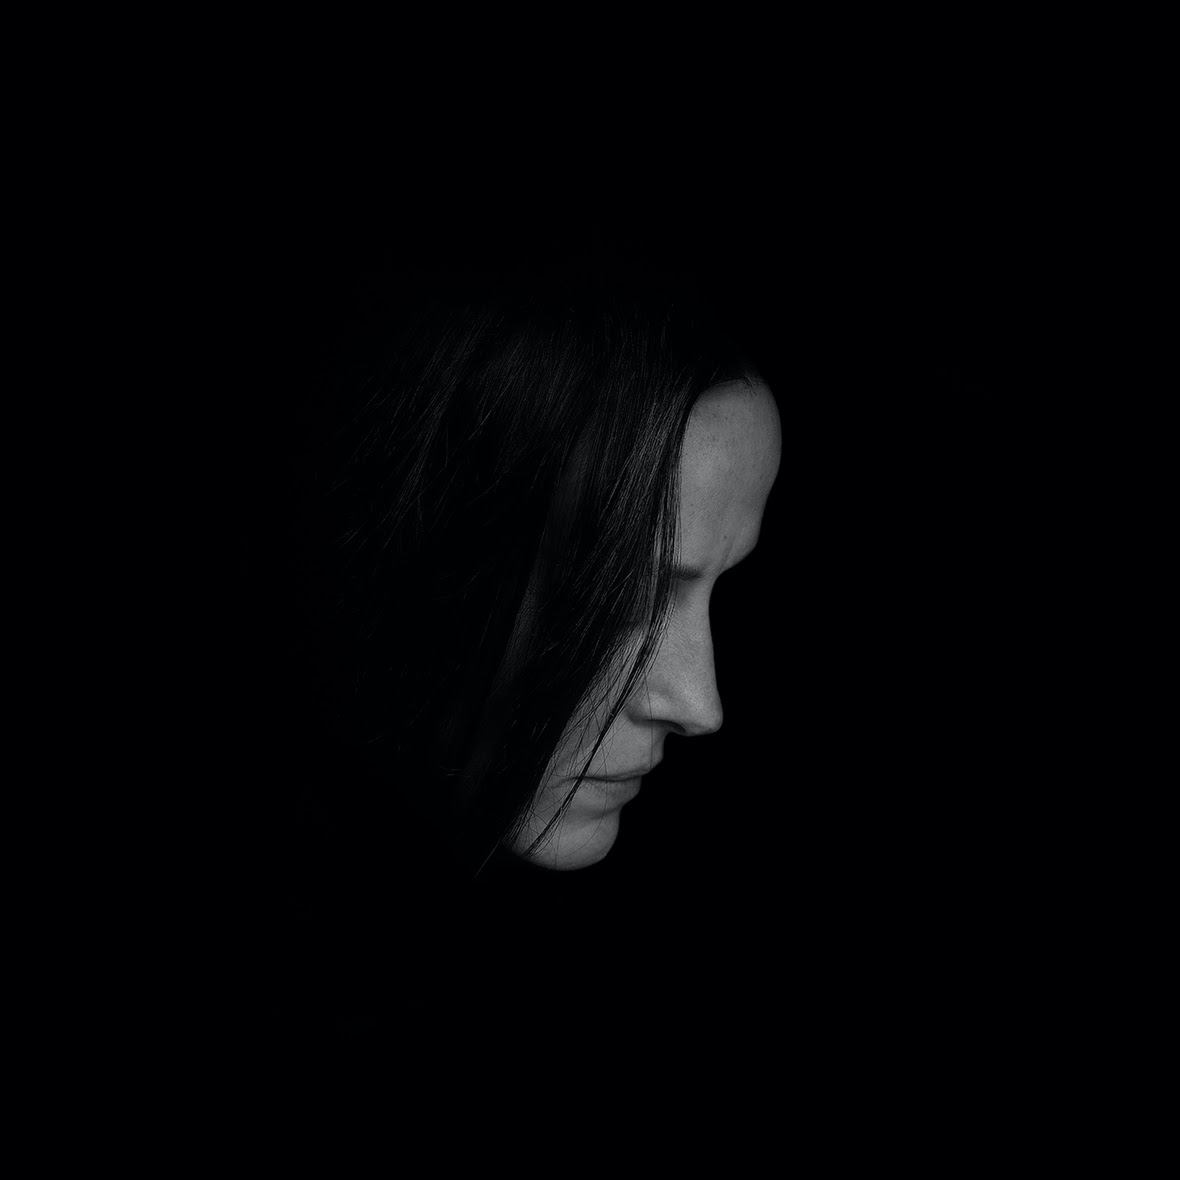 .@KeeleyForsyth announces new album 'The Hollow' - impactful new song 'Horse' is out now, 'reimagining' aspects of the score to Bela Tarr’s final film, The Turin Horse. clashmusic.com/news/keeley-fo…